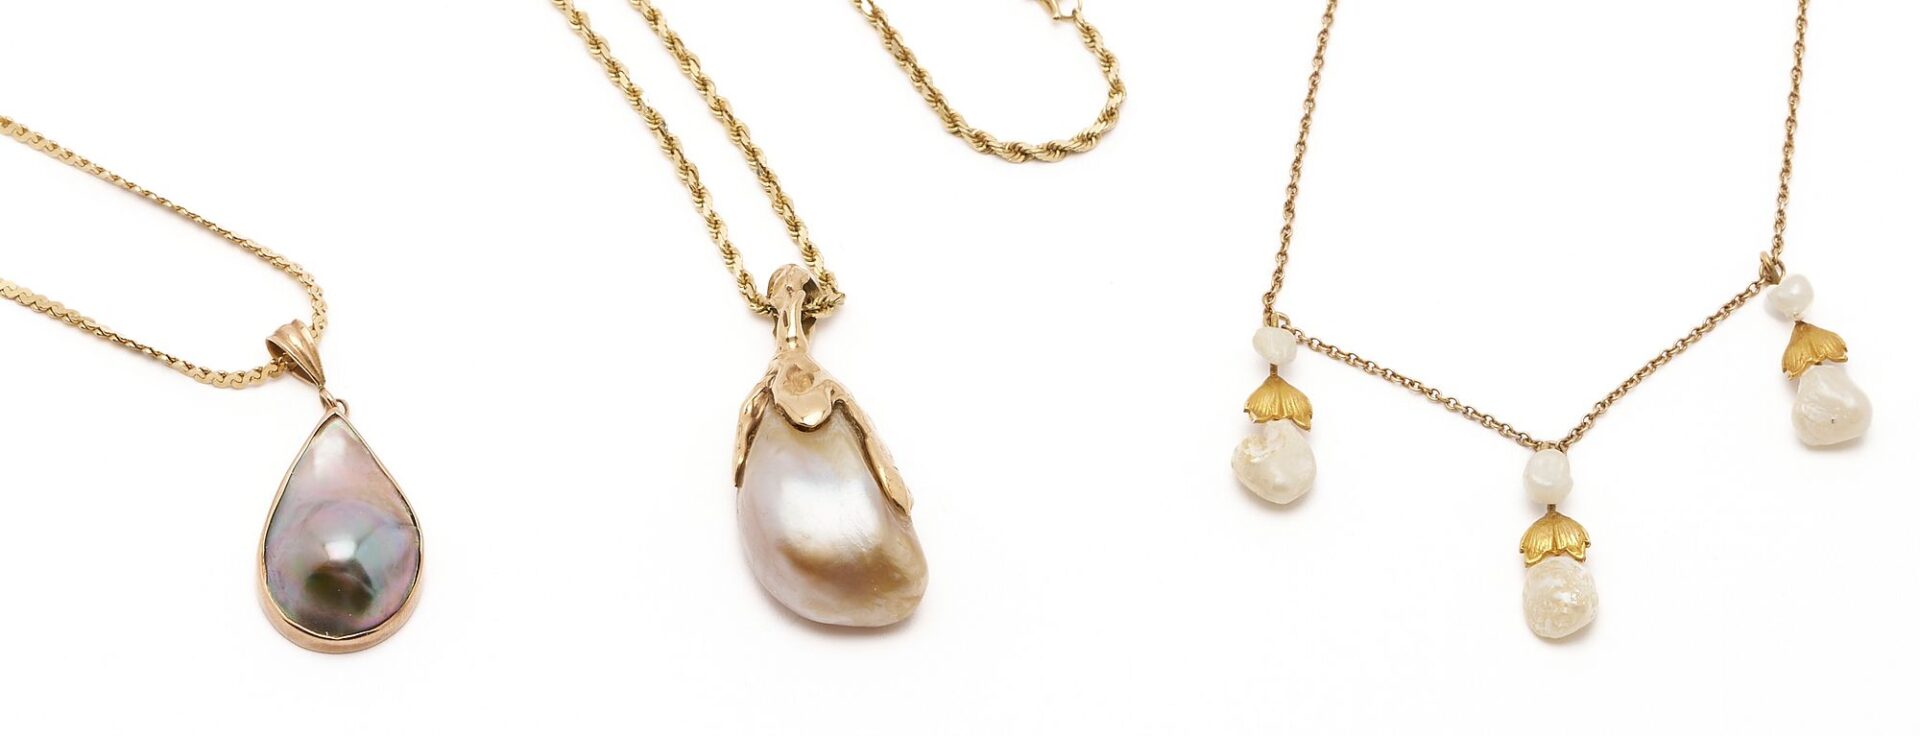 Lot 842: Three (3) 14k Gold & Pearl Necklaces